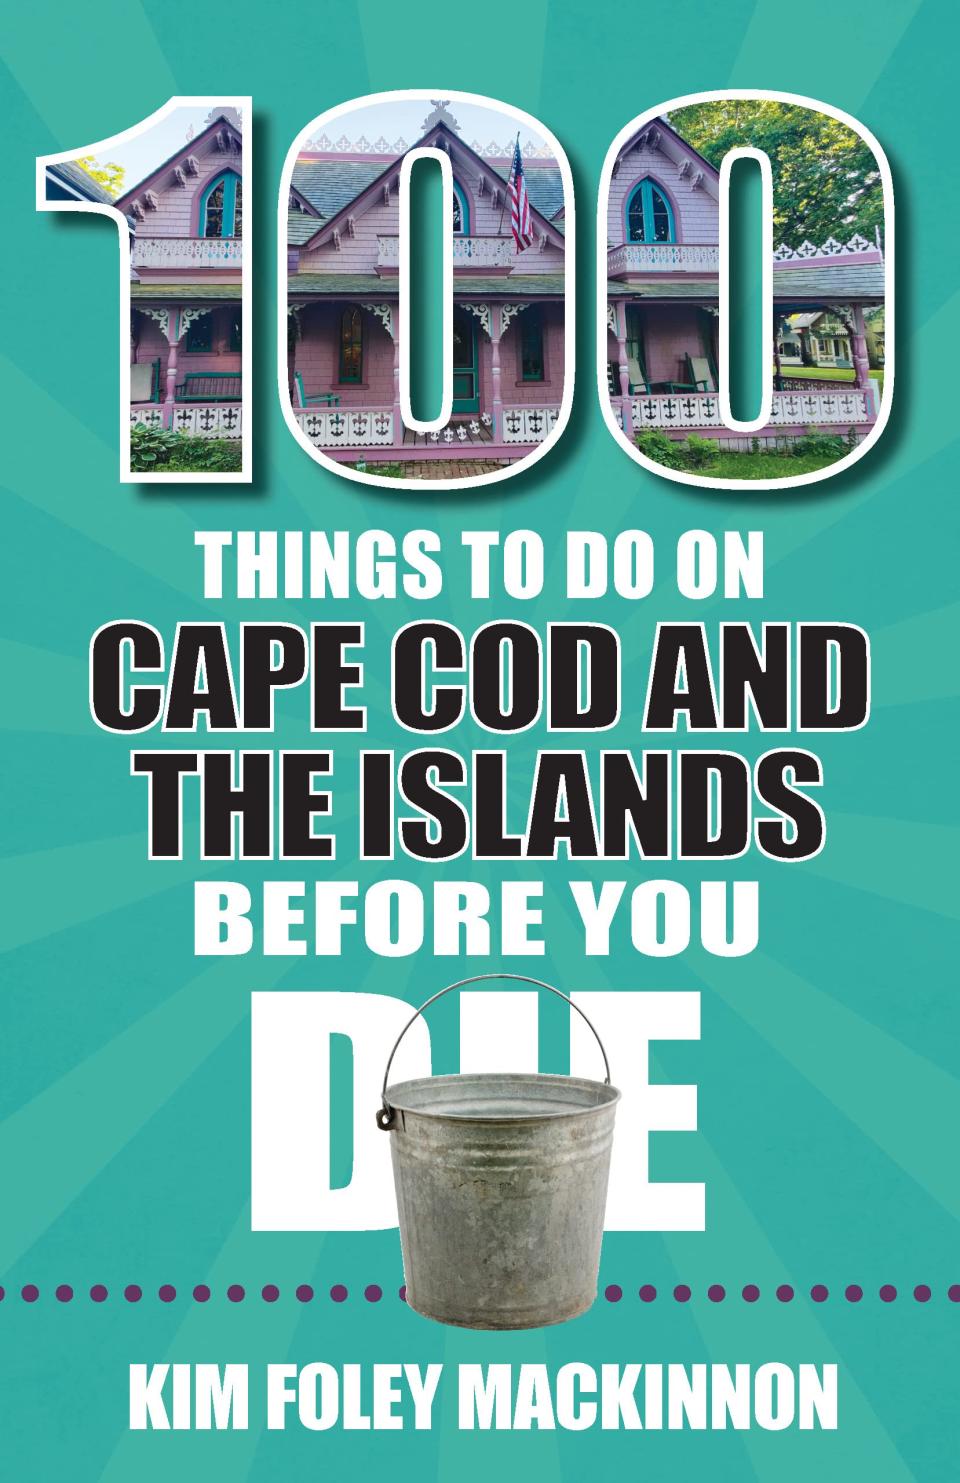 “100 Things to Do on Cape Cod and the Islands Before You Die,” by Kim Foley MacKinnon